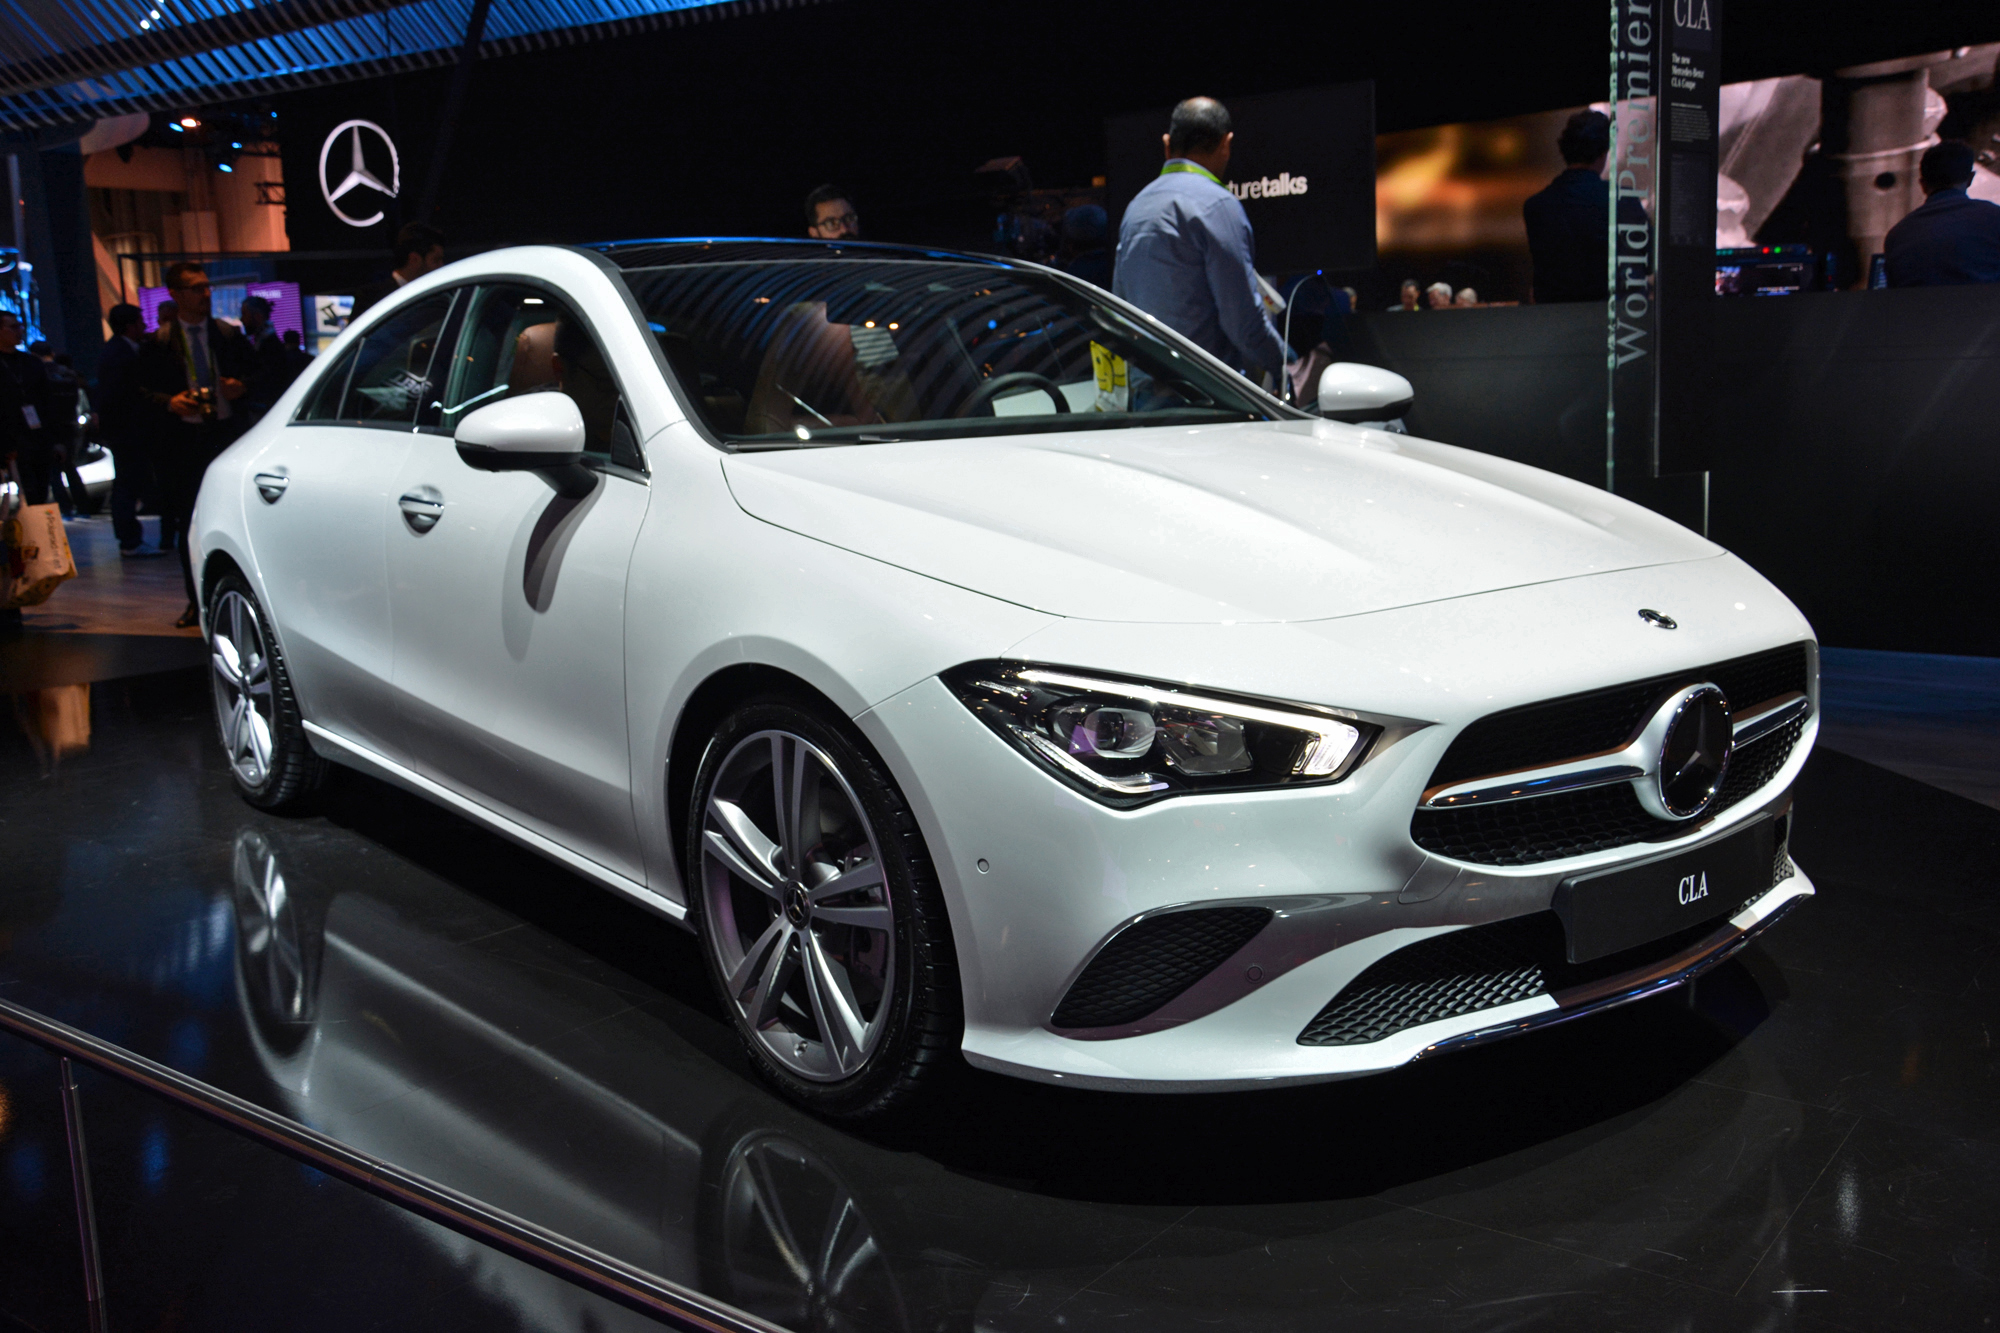 Mercedes Benz CLA Brings Its Svelte Looks To CES